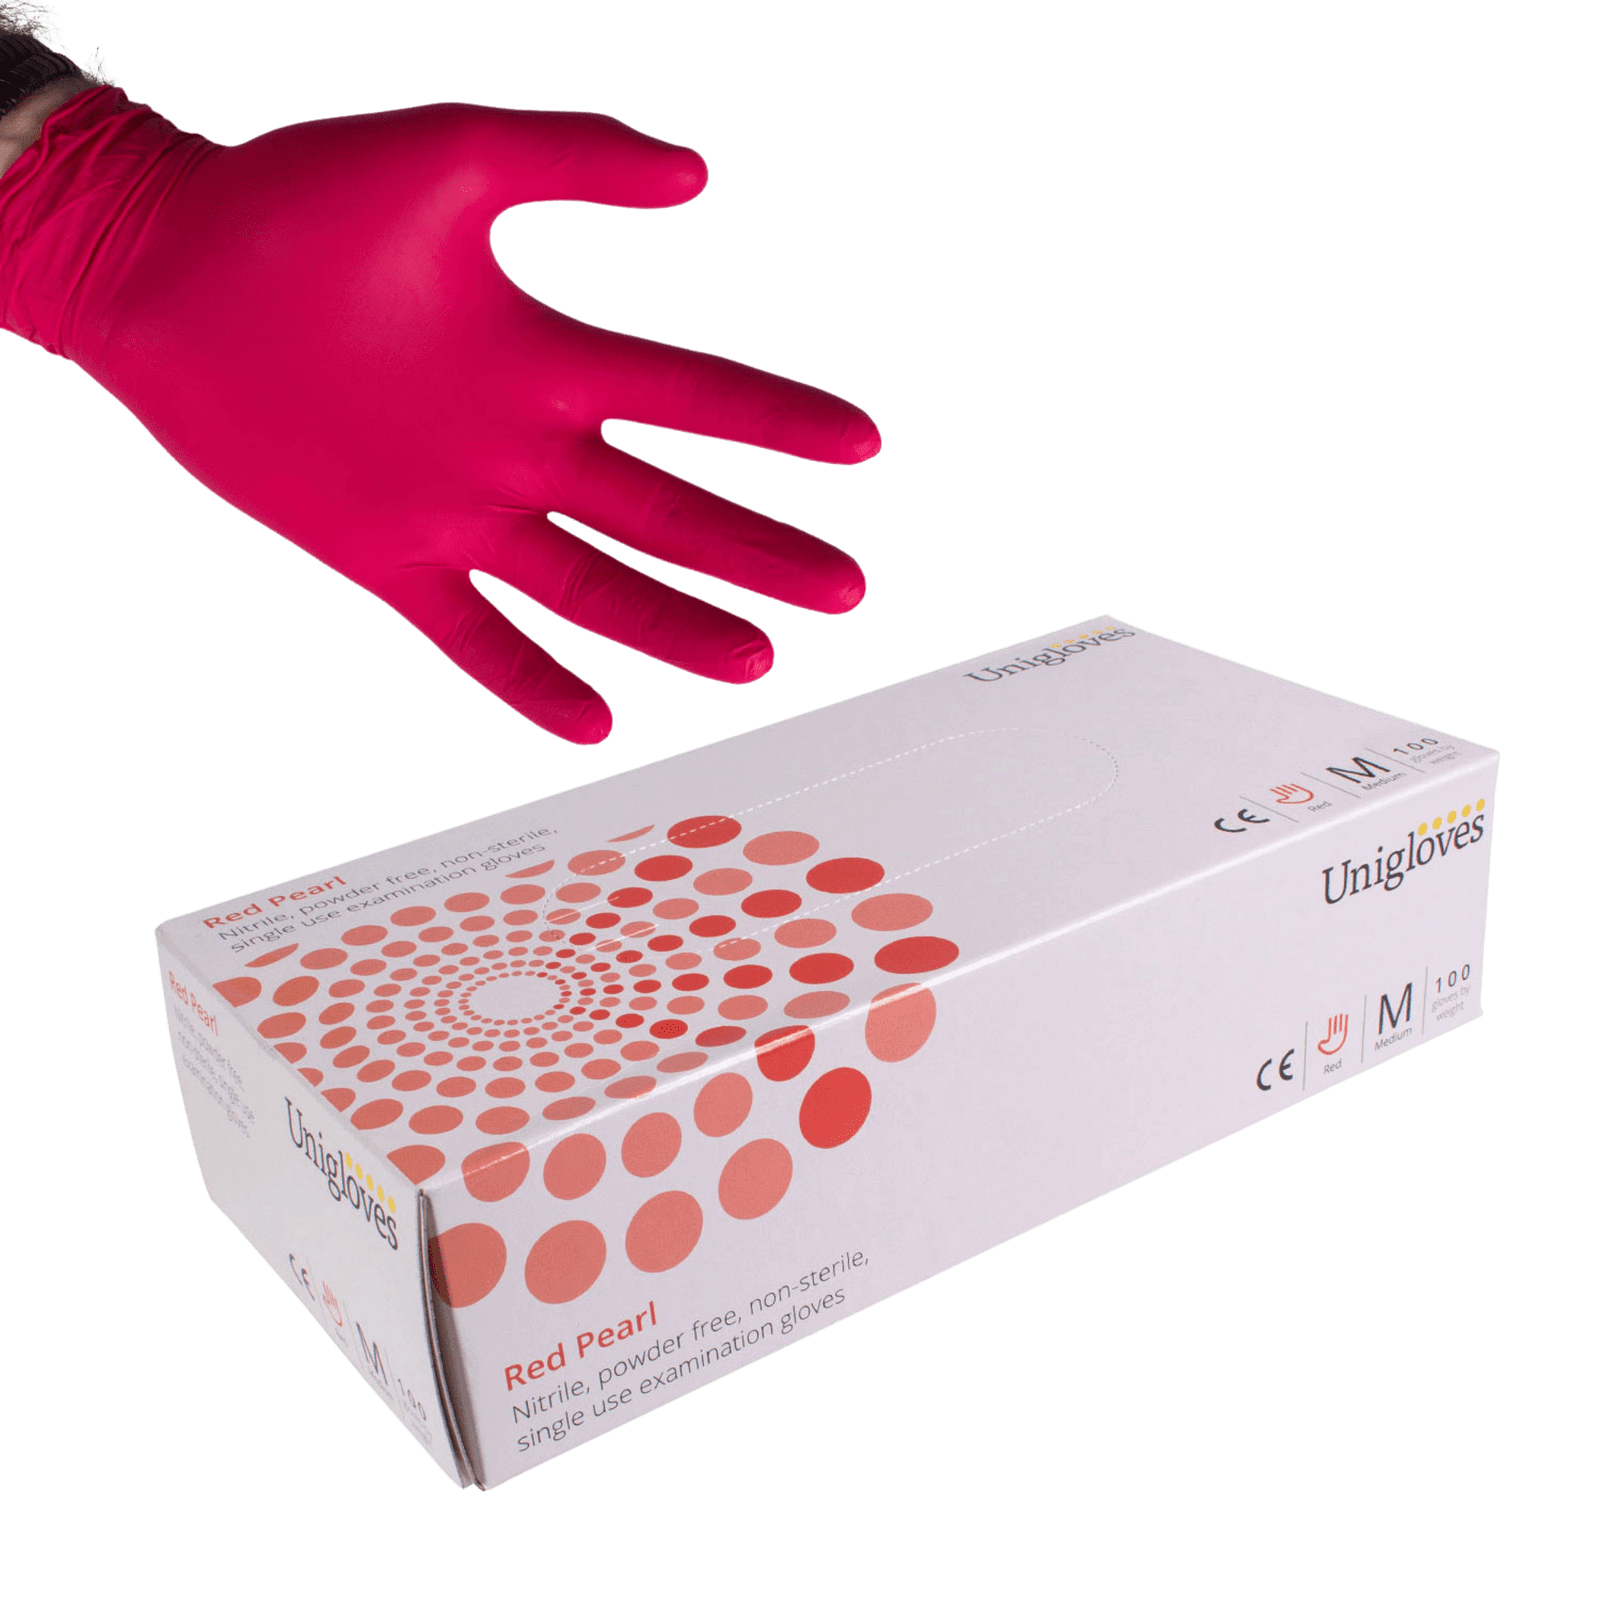 Unigloves Red Pearl Nitrile gloves - box of 100 pieces